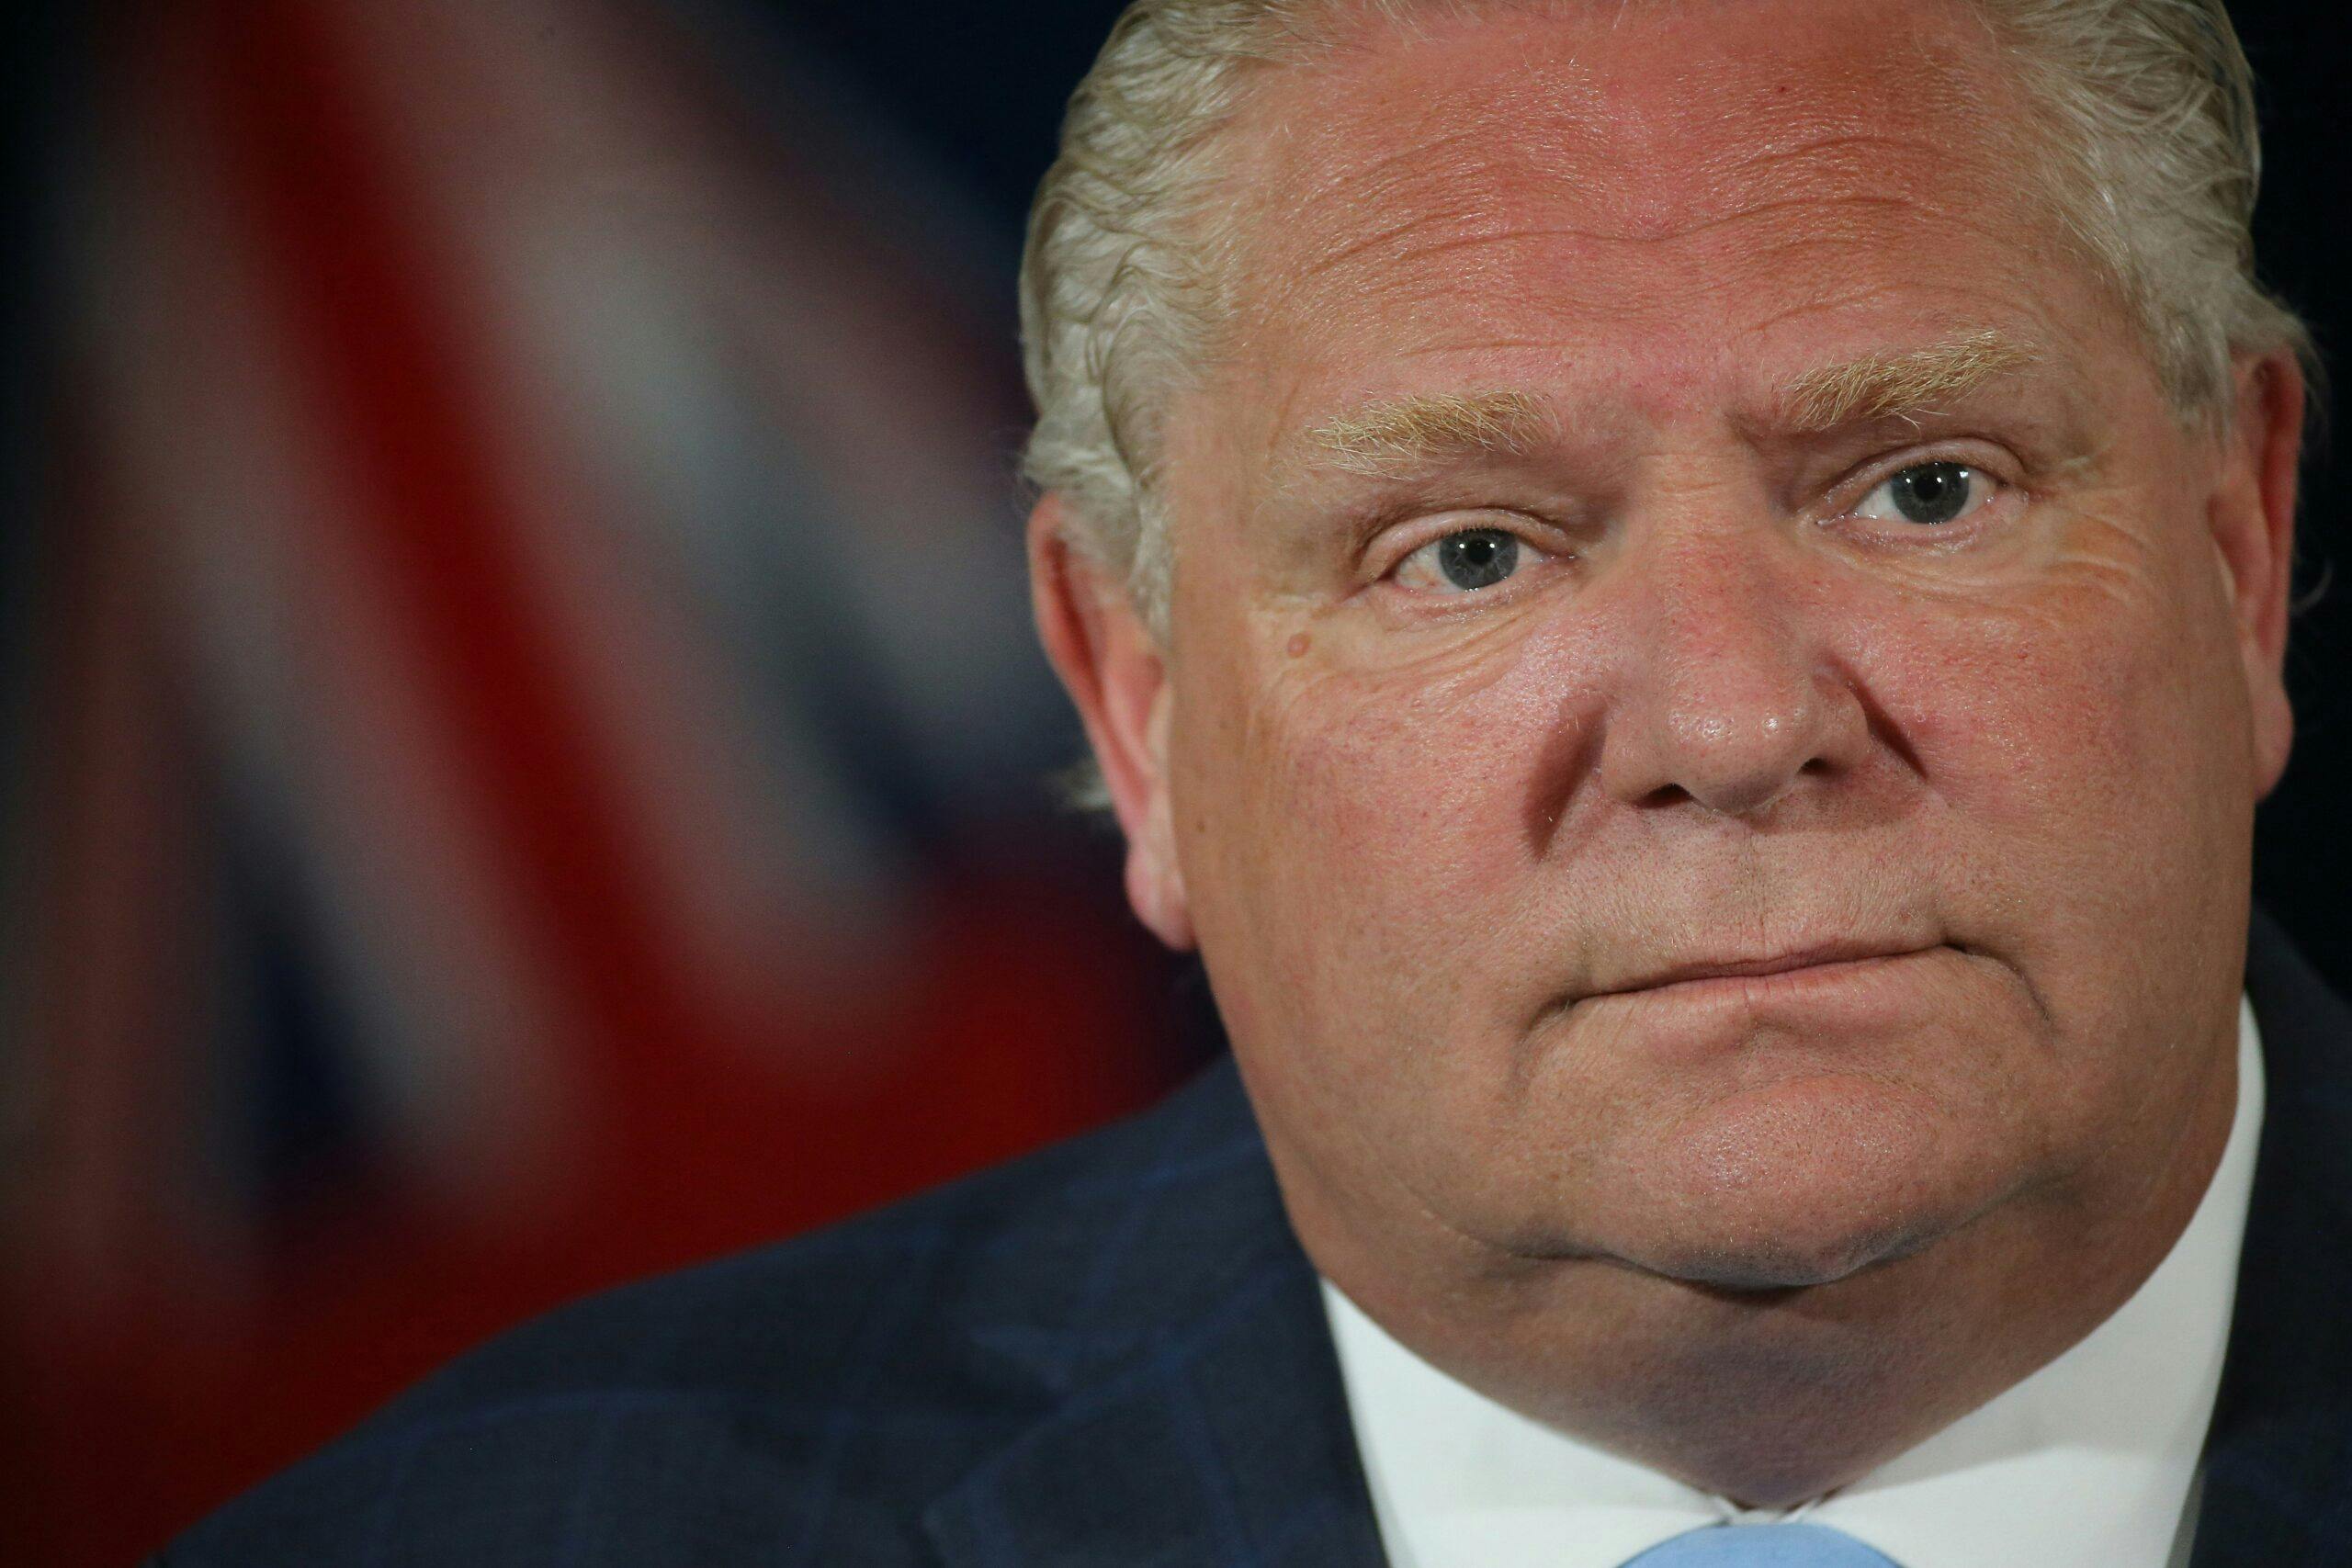 Man with ‘butcher’s knife’ arrested outside Premier Ford’s residence